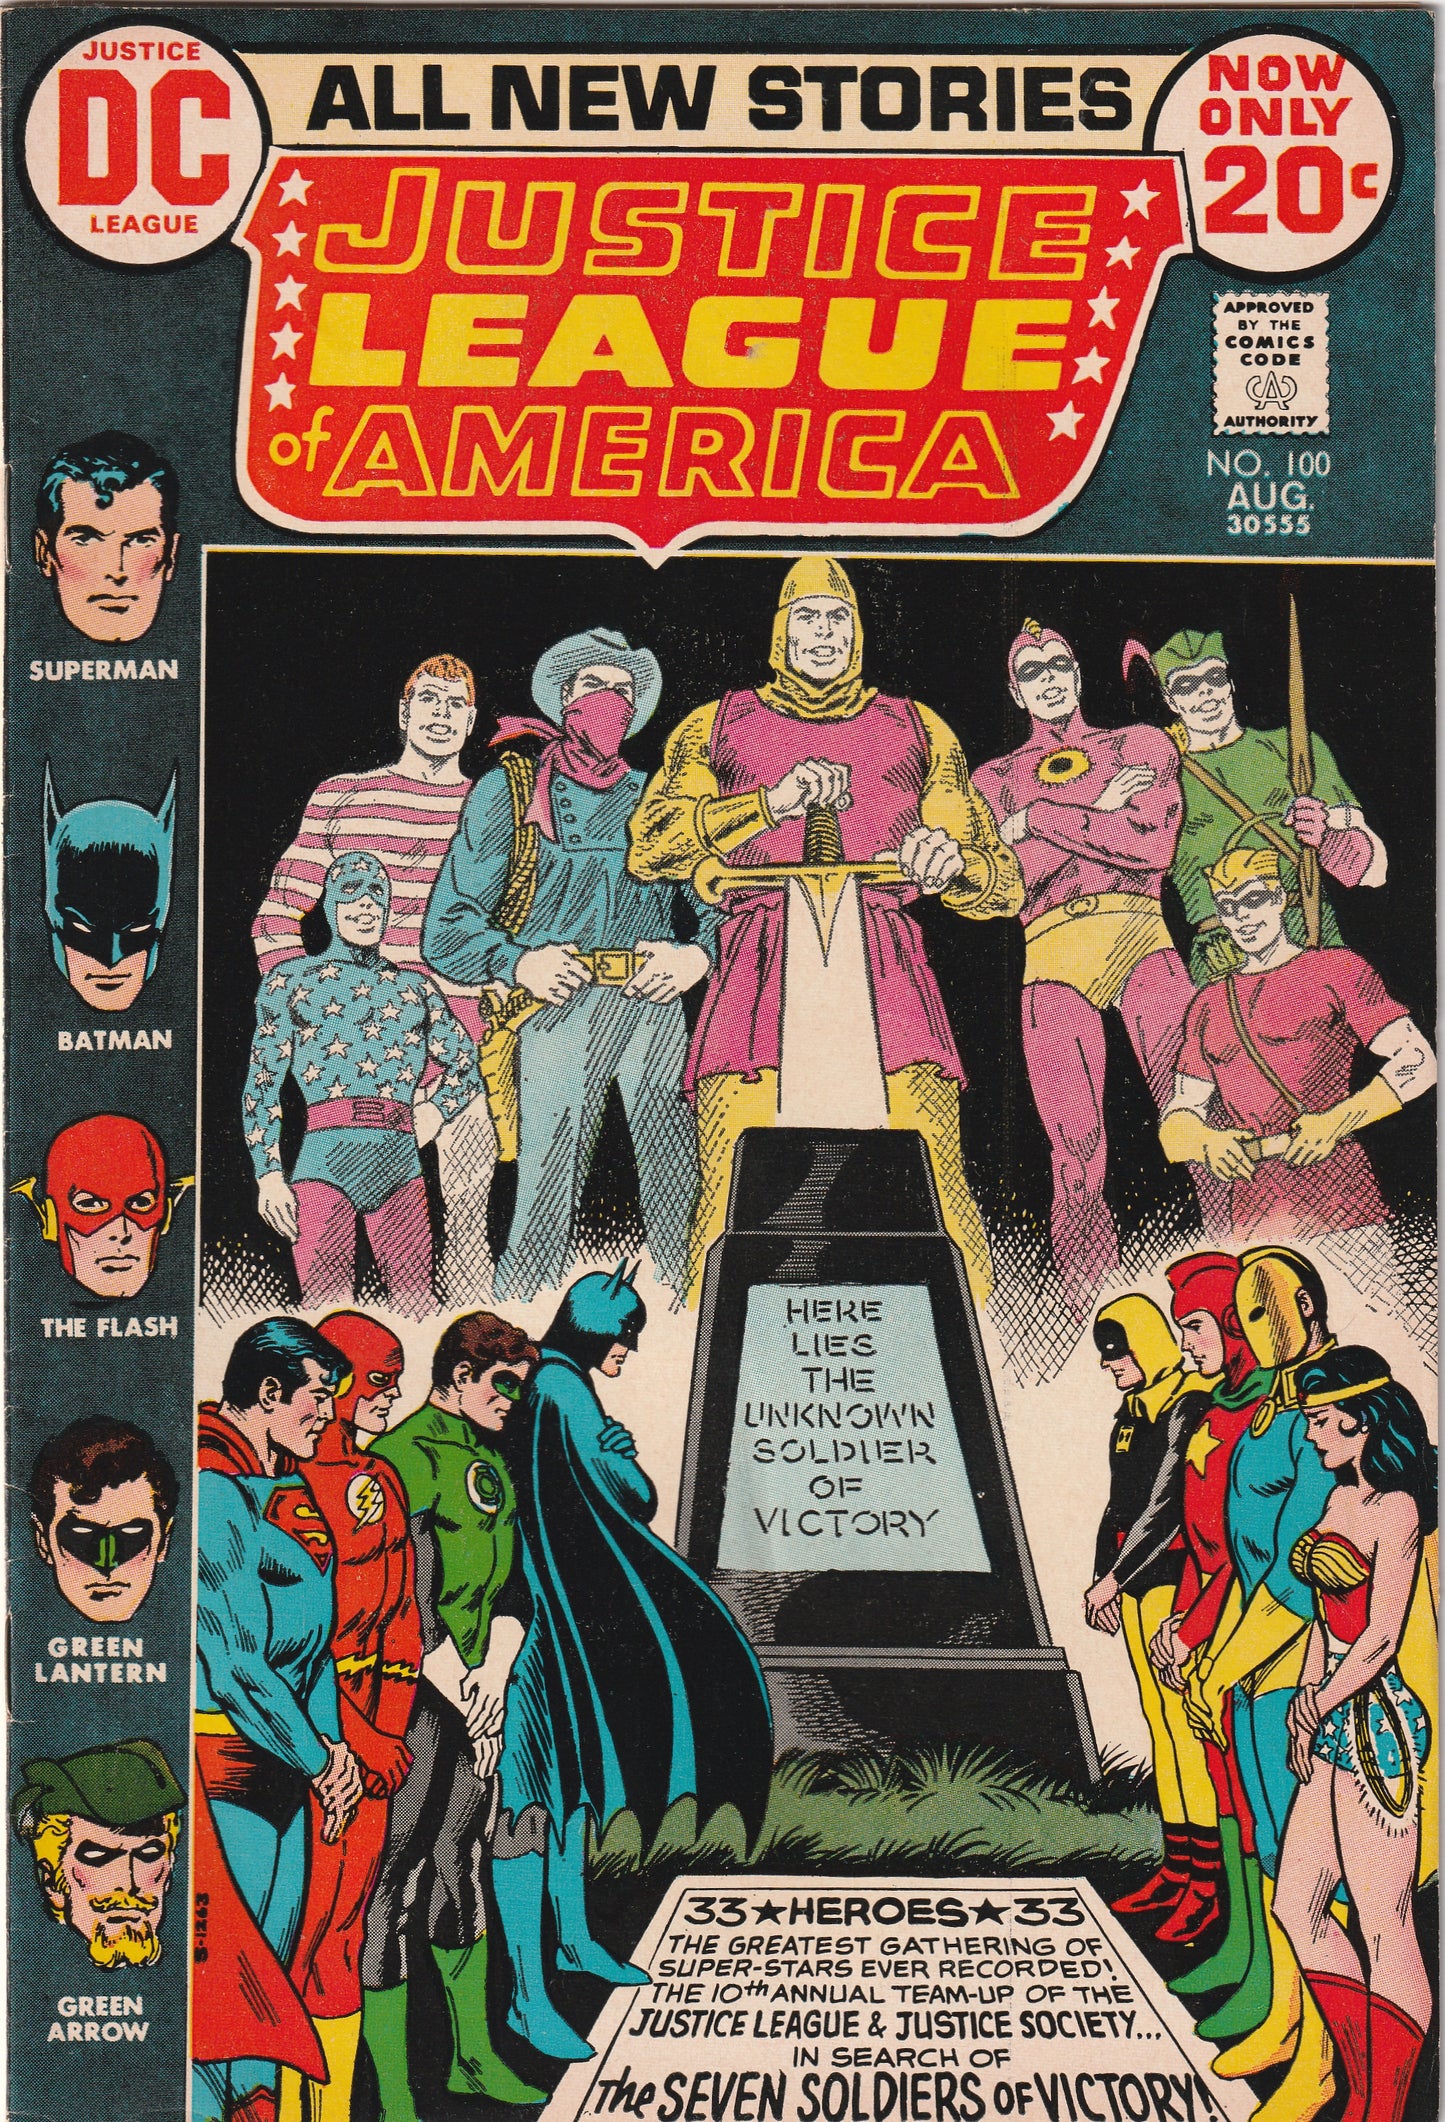 Justice League of America #100 (1972) - 1st Meeting of G.A. & S.A. Wonder Woman